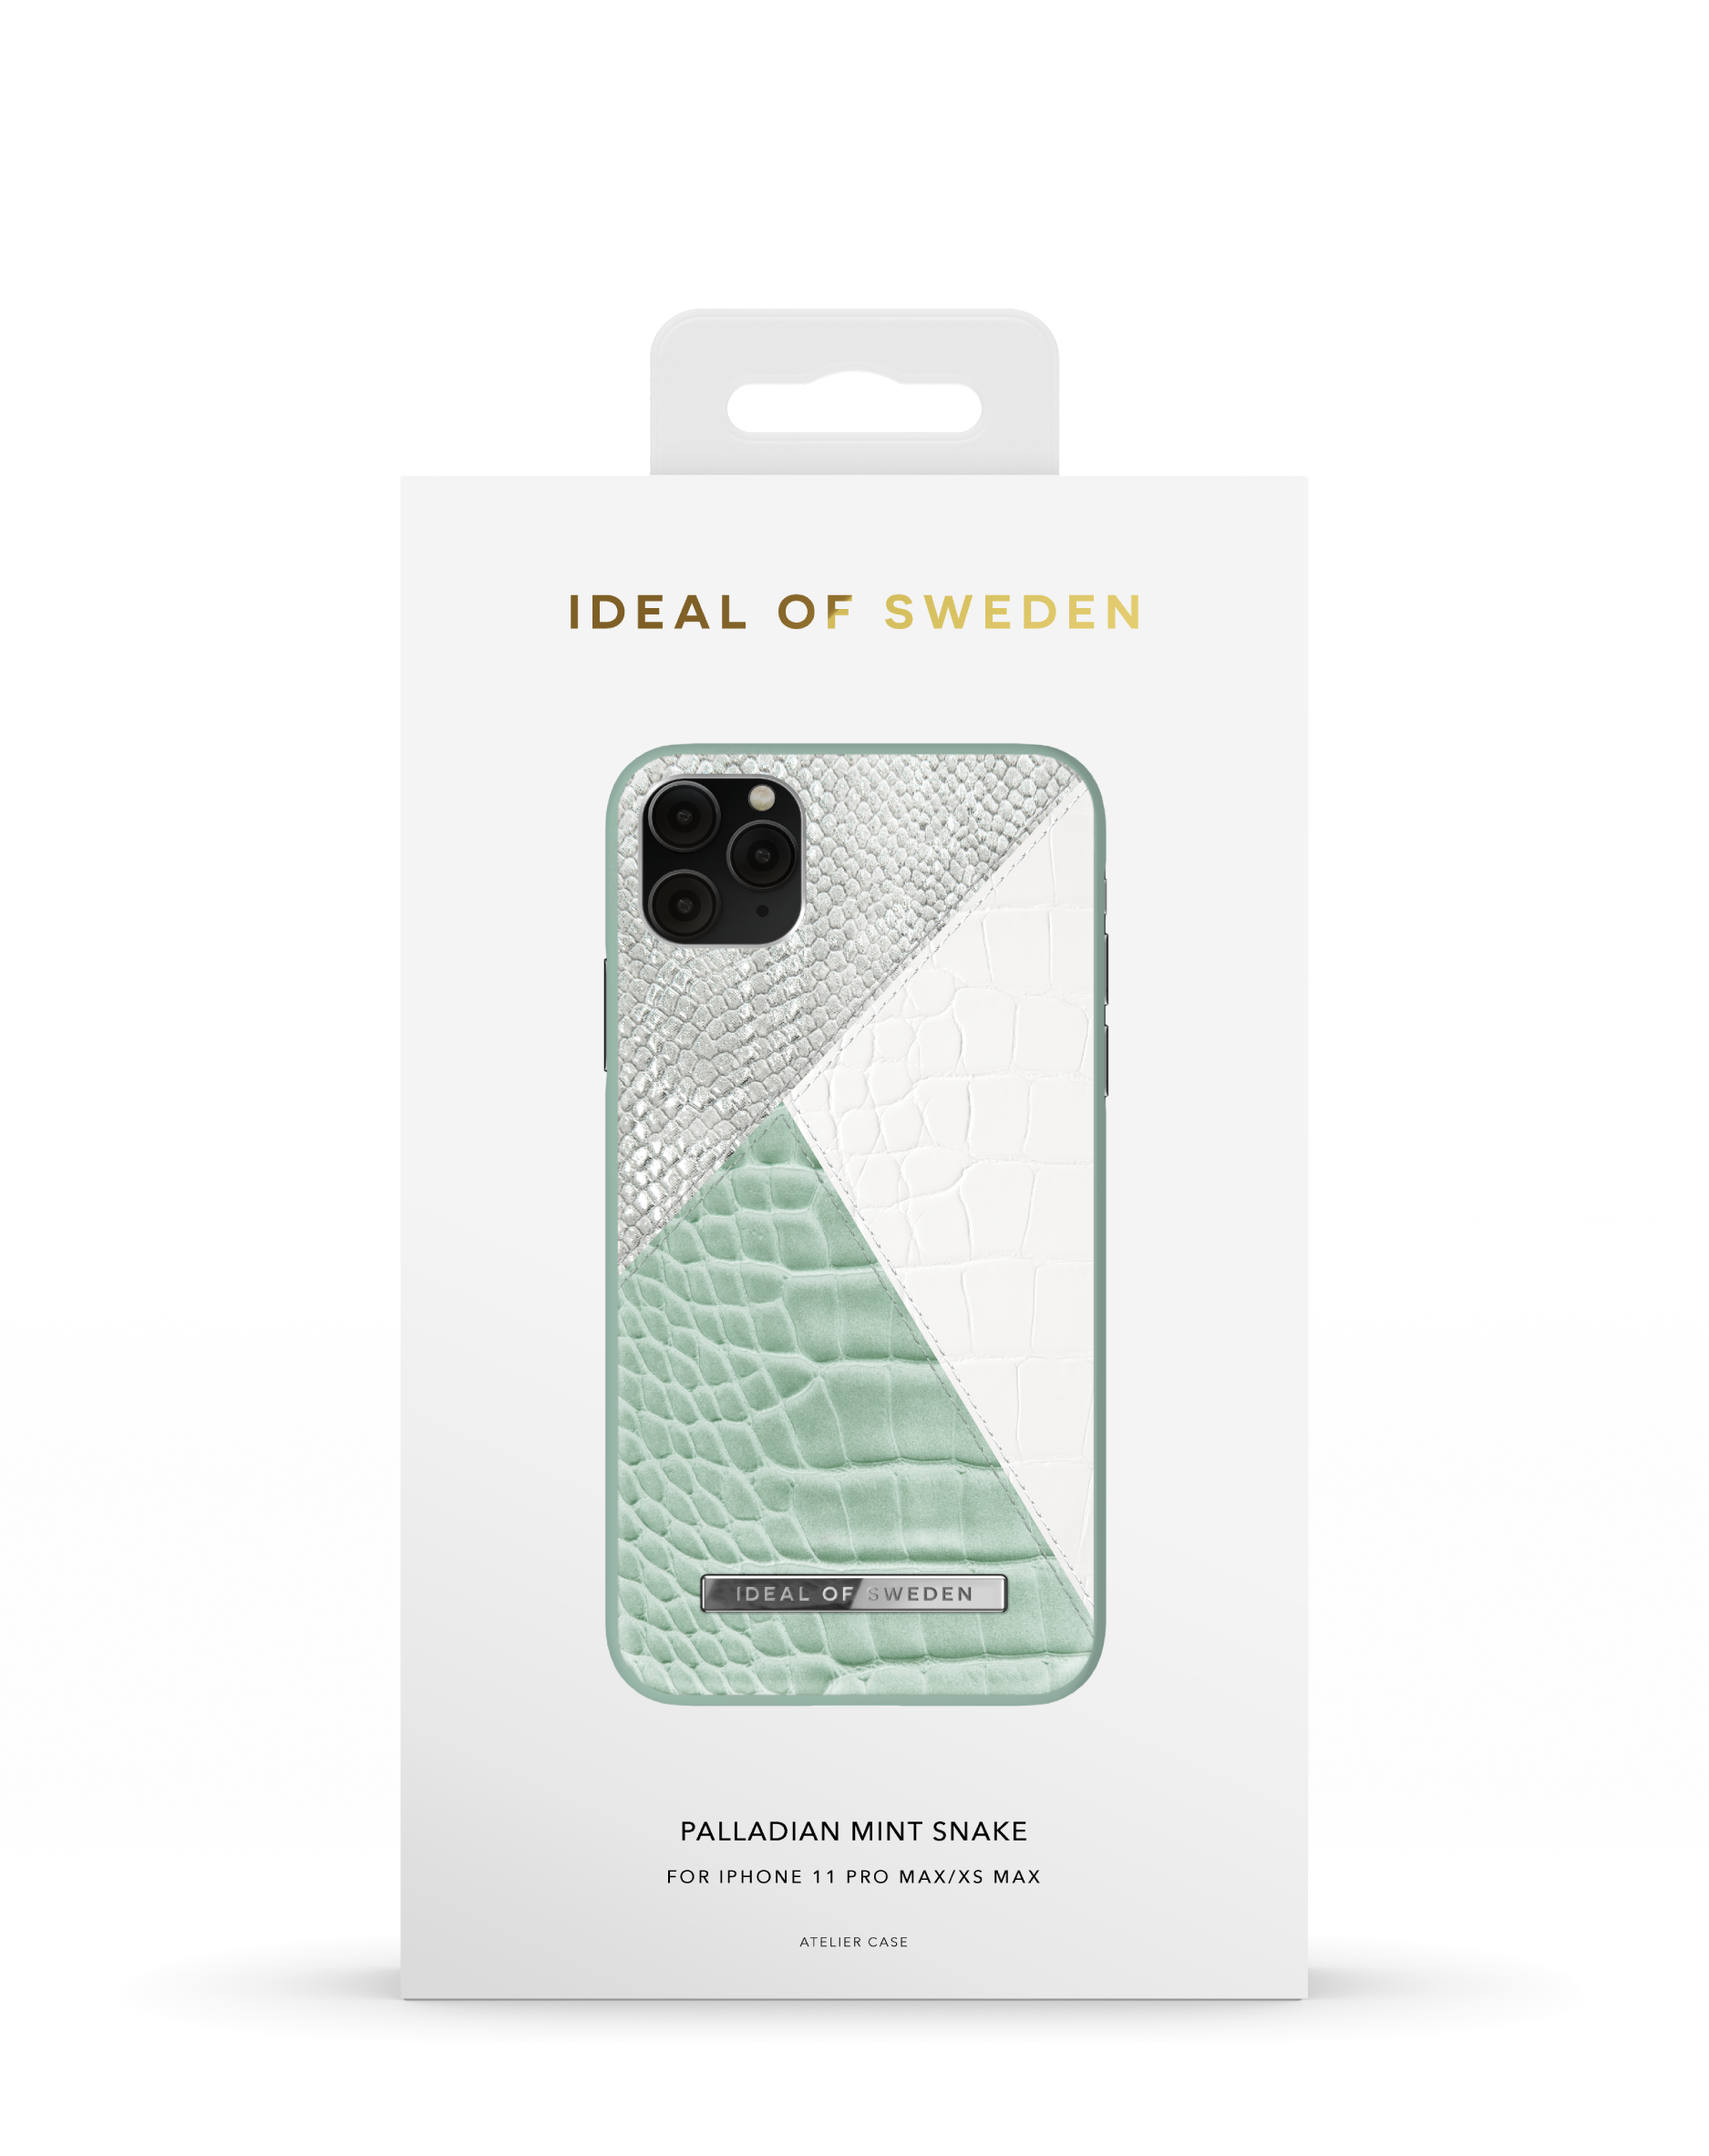 Backcover, SWEDEN Snake iPhone 11 Pro XS Apple Apple IDACSS21-I1965-268, OF IDEAL iPhone Apple, Mint Max, Max, Palladian